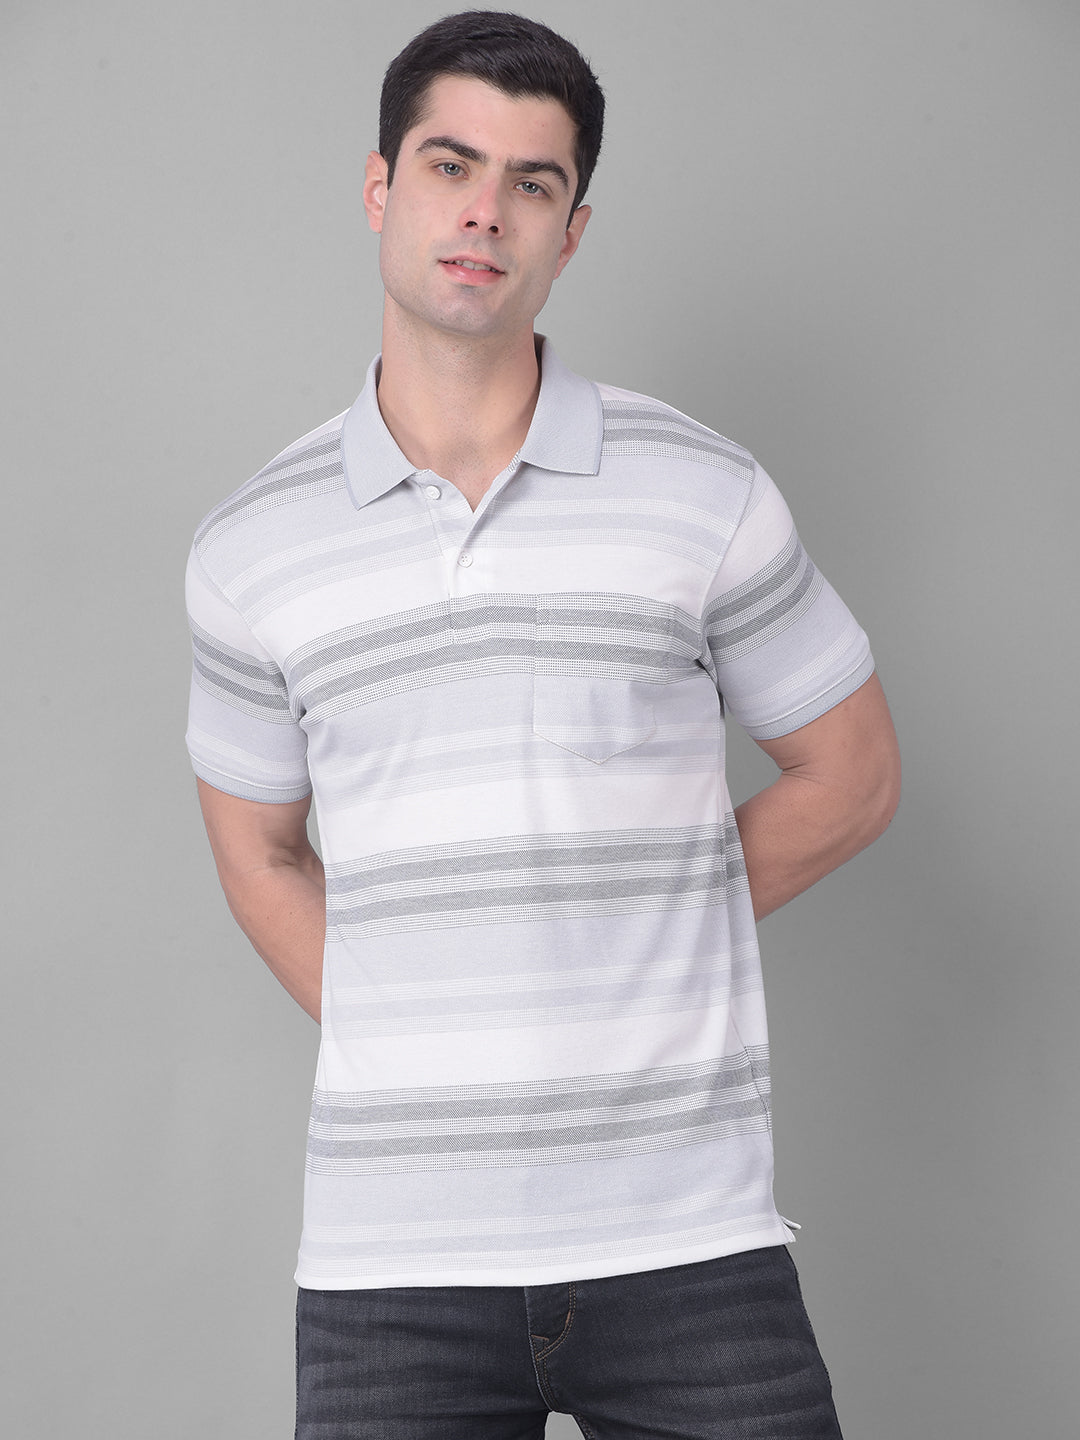 Men's Shirts, Tees, Polos | Quince